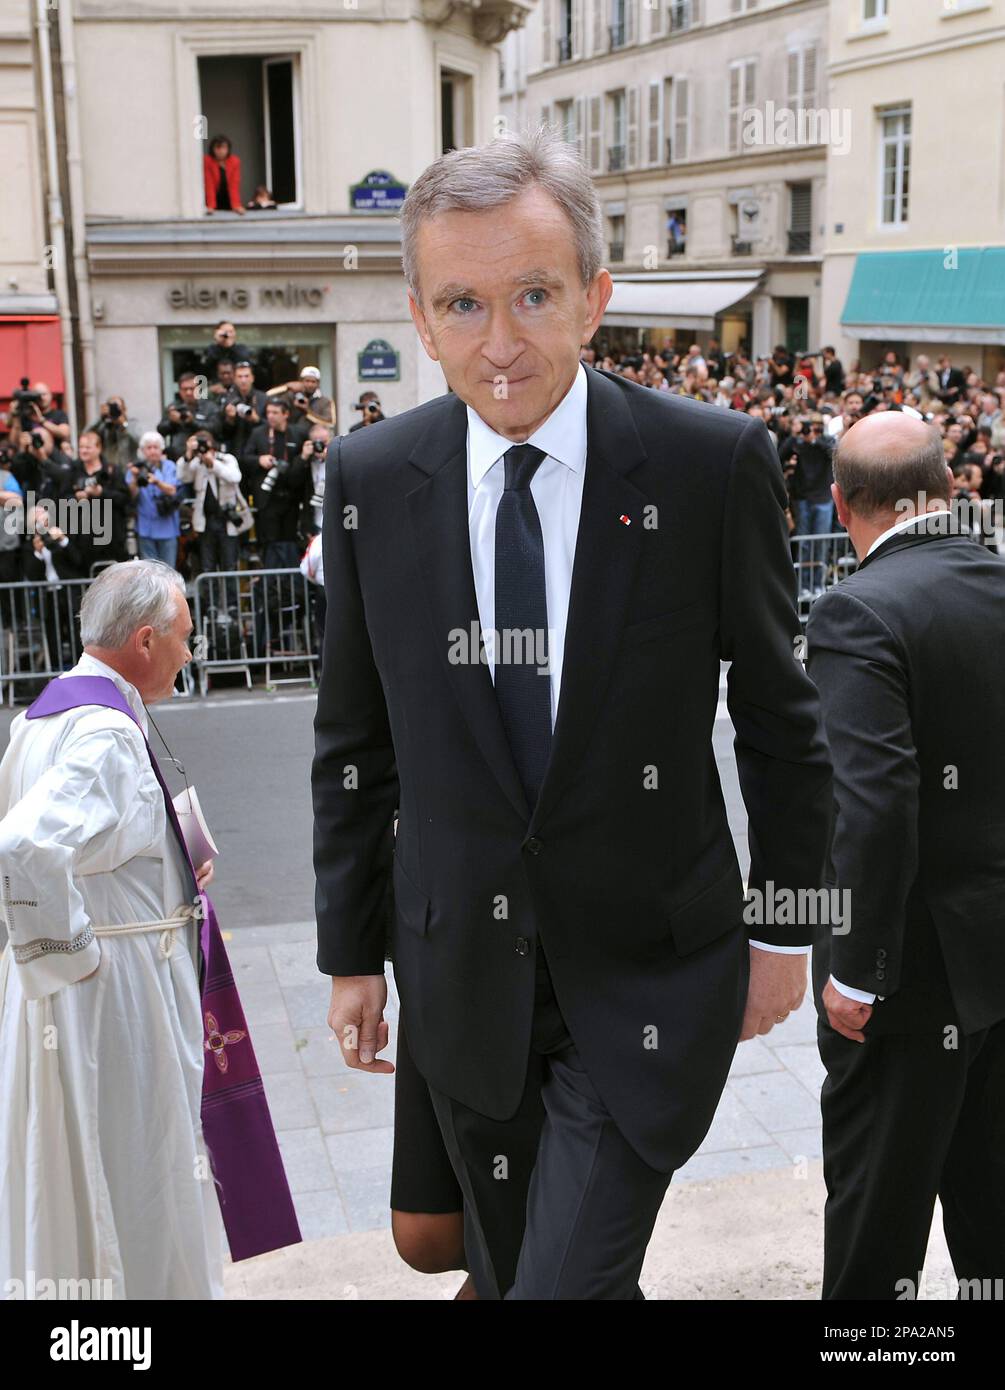 Bernard Arnault created the world's most influential luxury conglomerate  LVMH